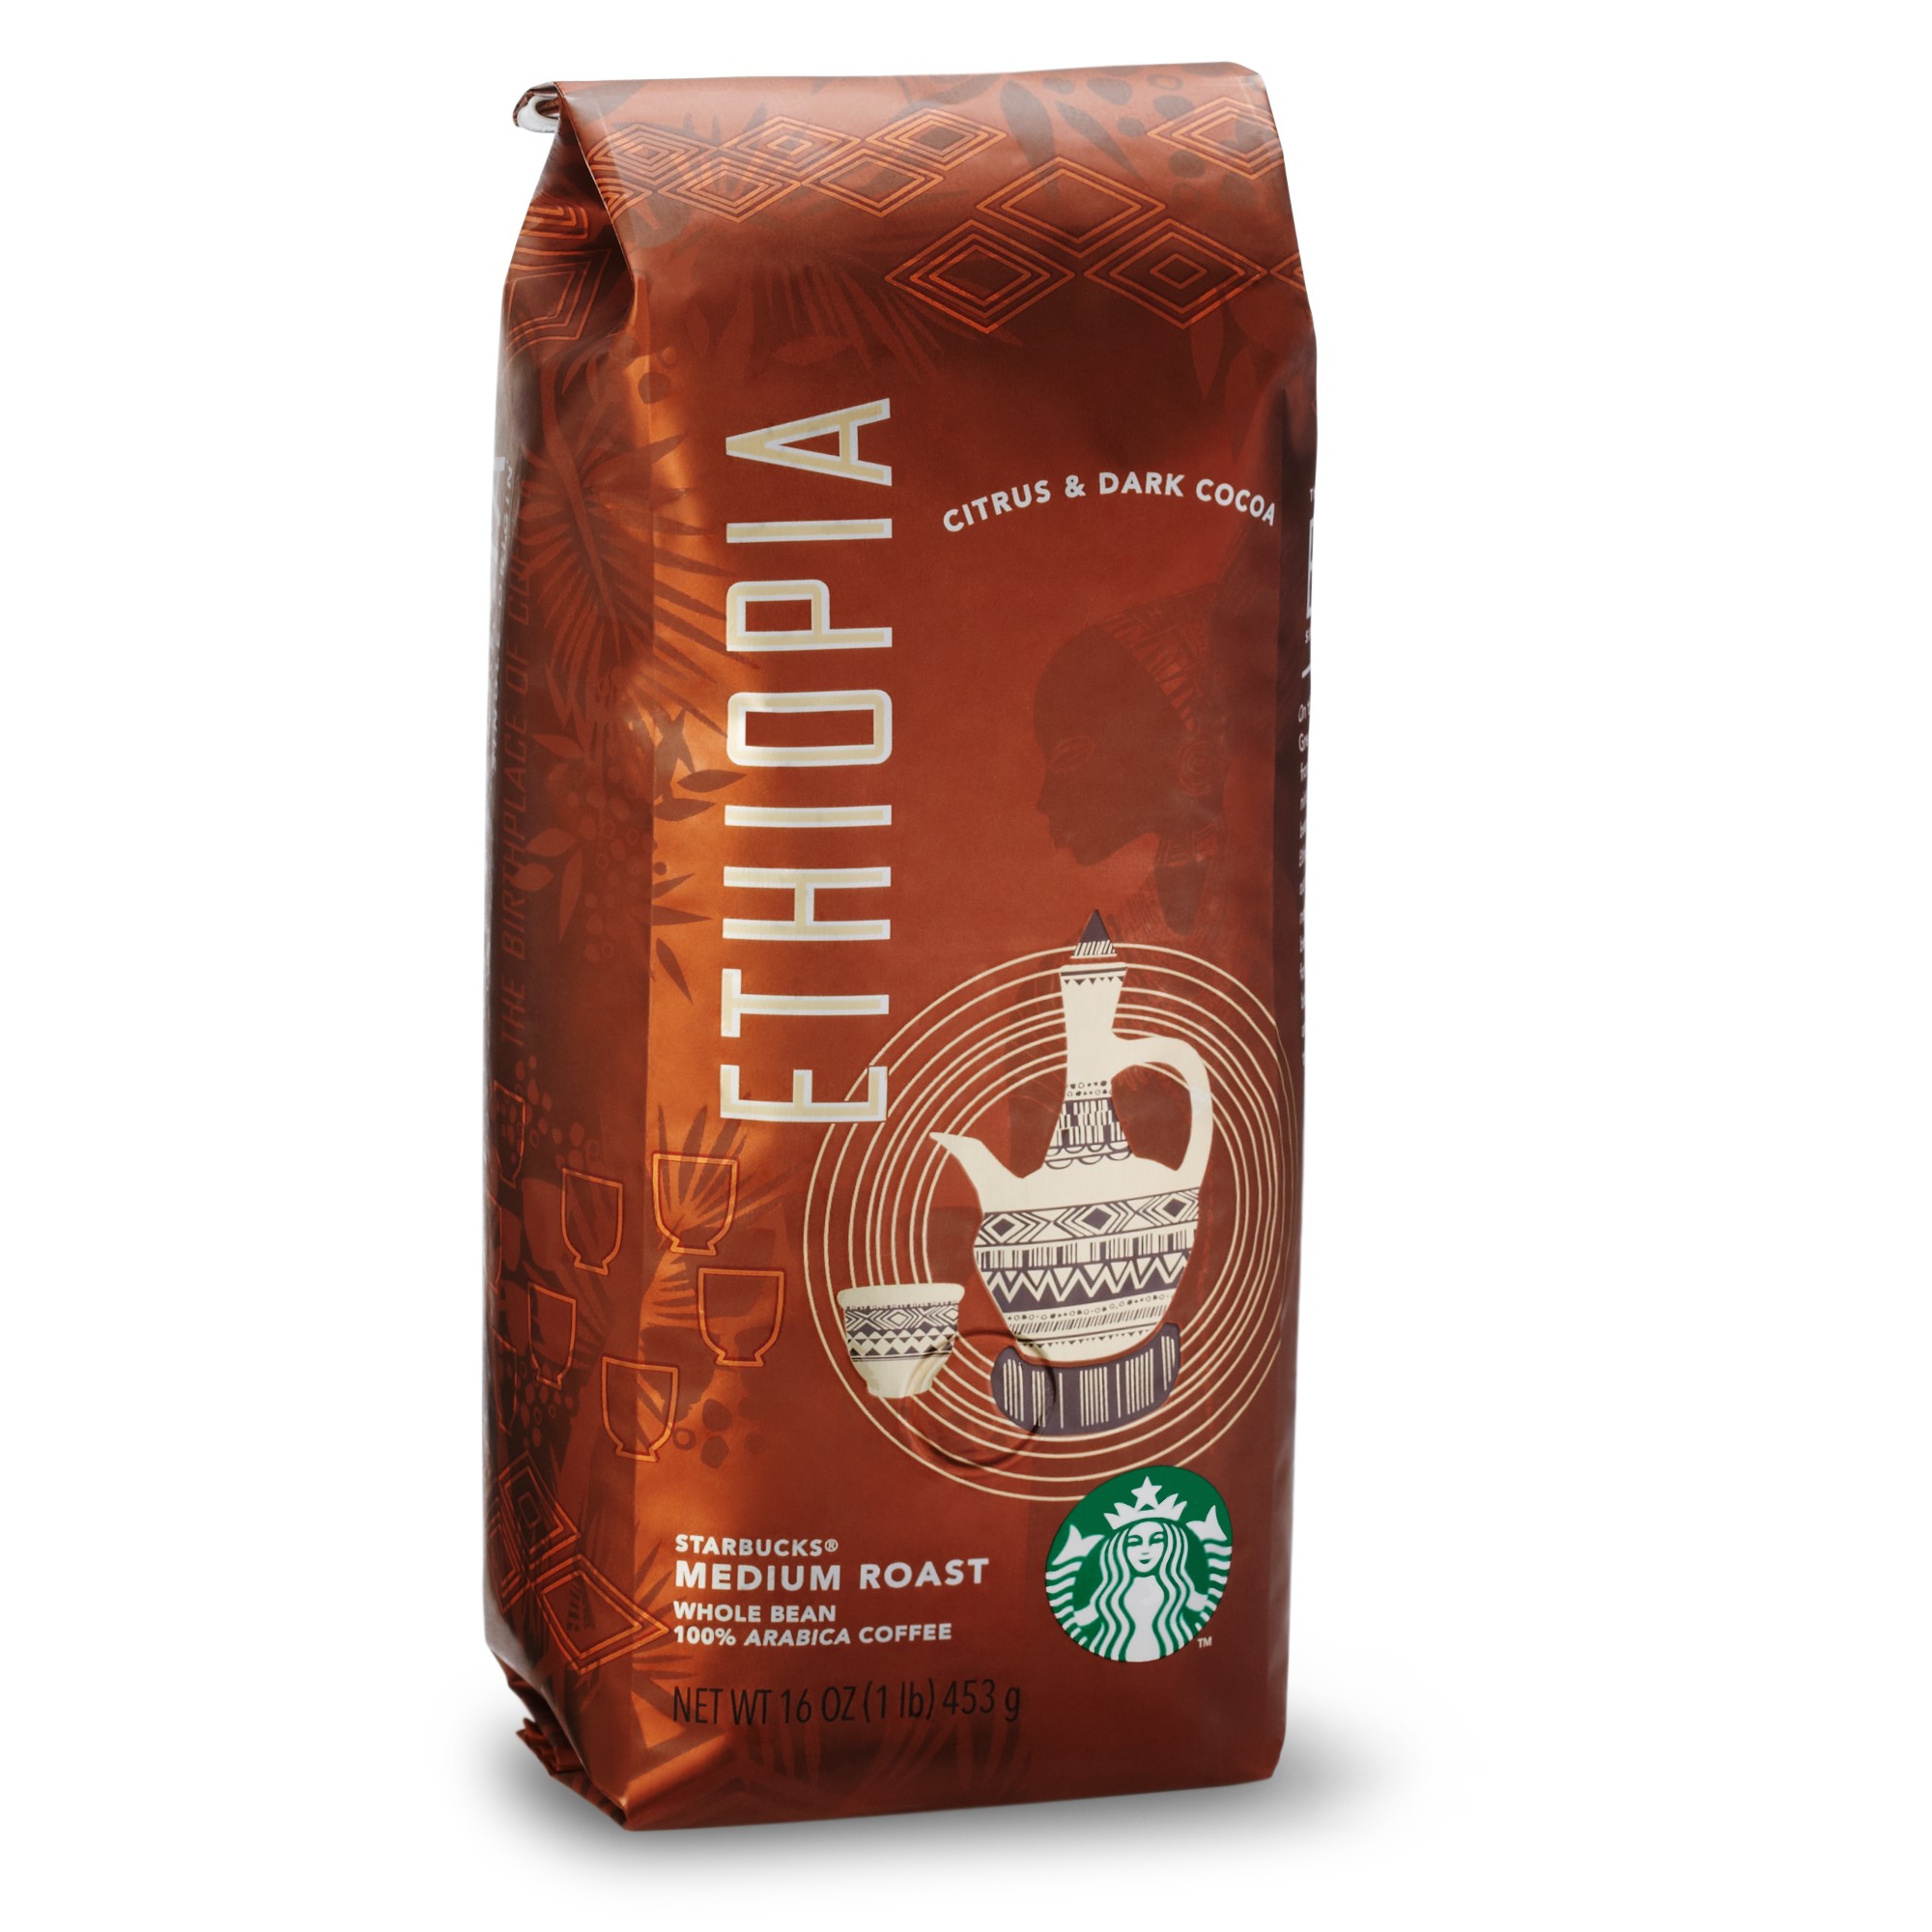 ORIGINS - Starbucks honours the birthplace of coffee with Ethiopia, a new  coffee steeped in history - Comunicaffe International